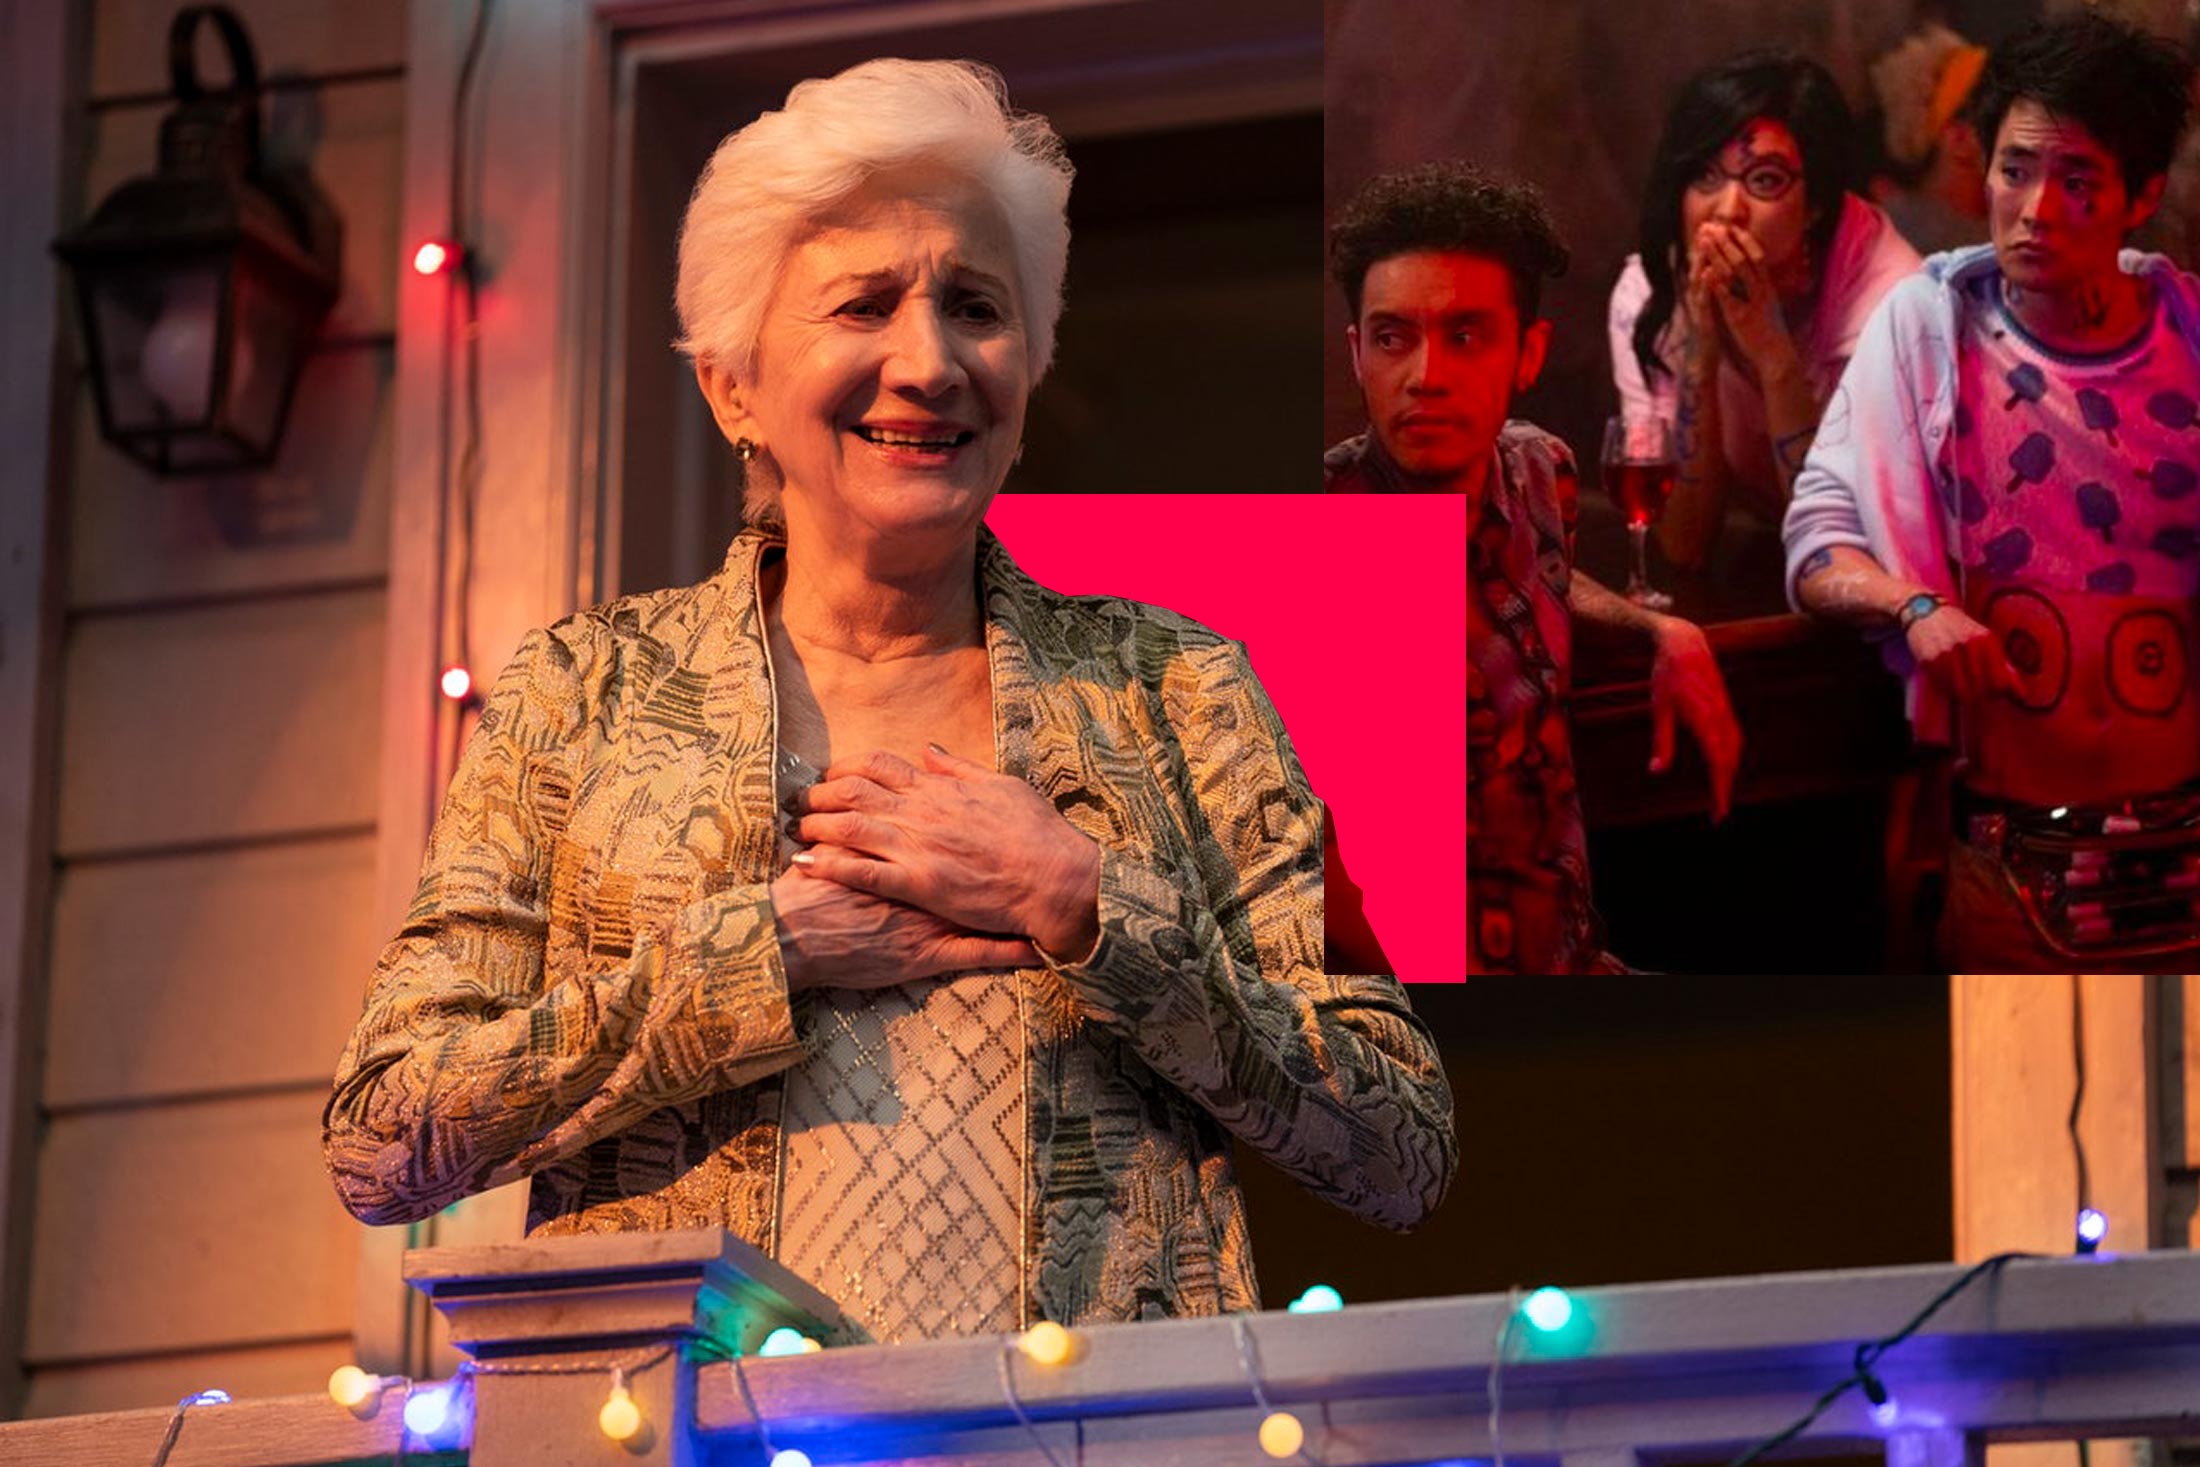 A still of Olympia Dukakis as Anna Madrigal, with a still of Garcia, Ashley Park, and Christopher Larkin as Jake, Ani, and Raven, respectively, in the corner.